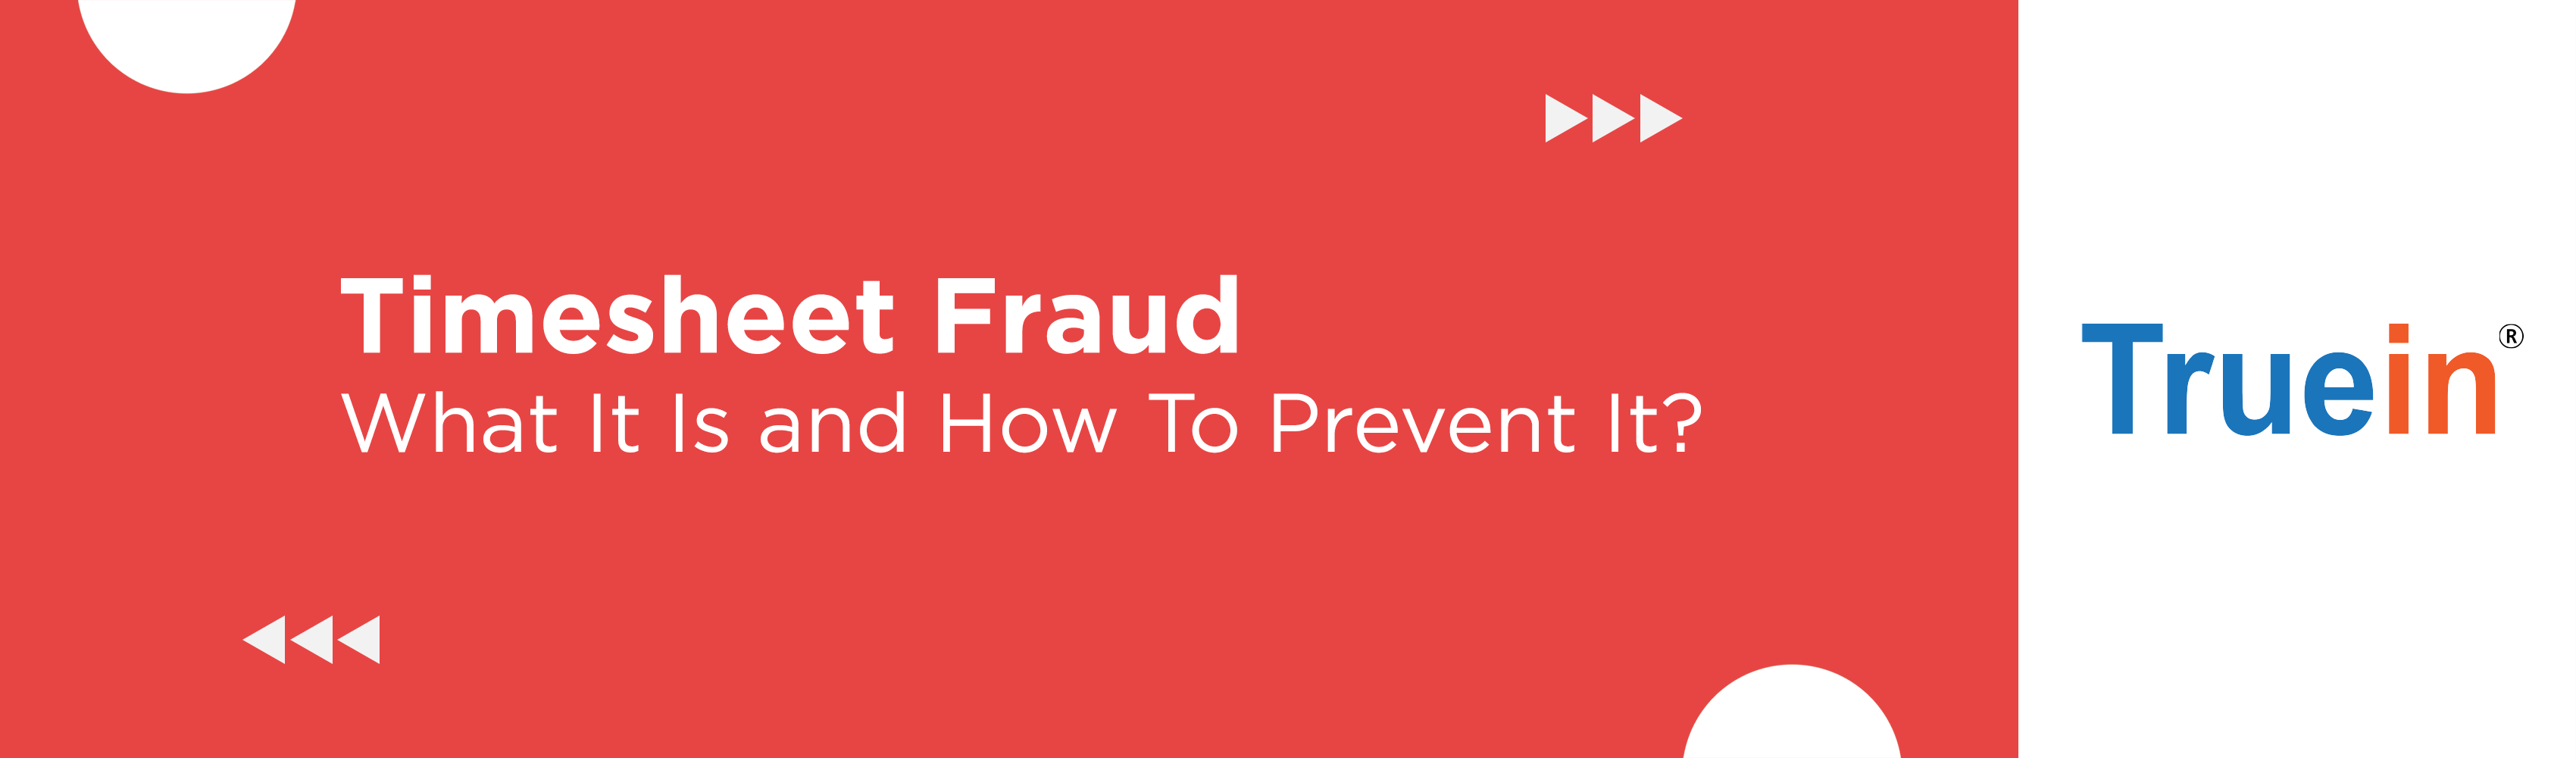 What Is Timesheet Fraud and How To Prevent It?